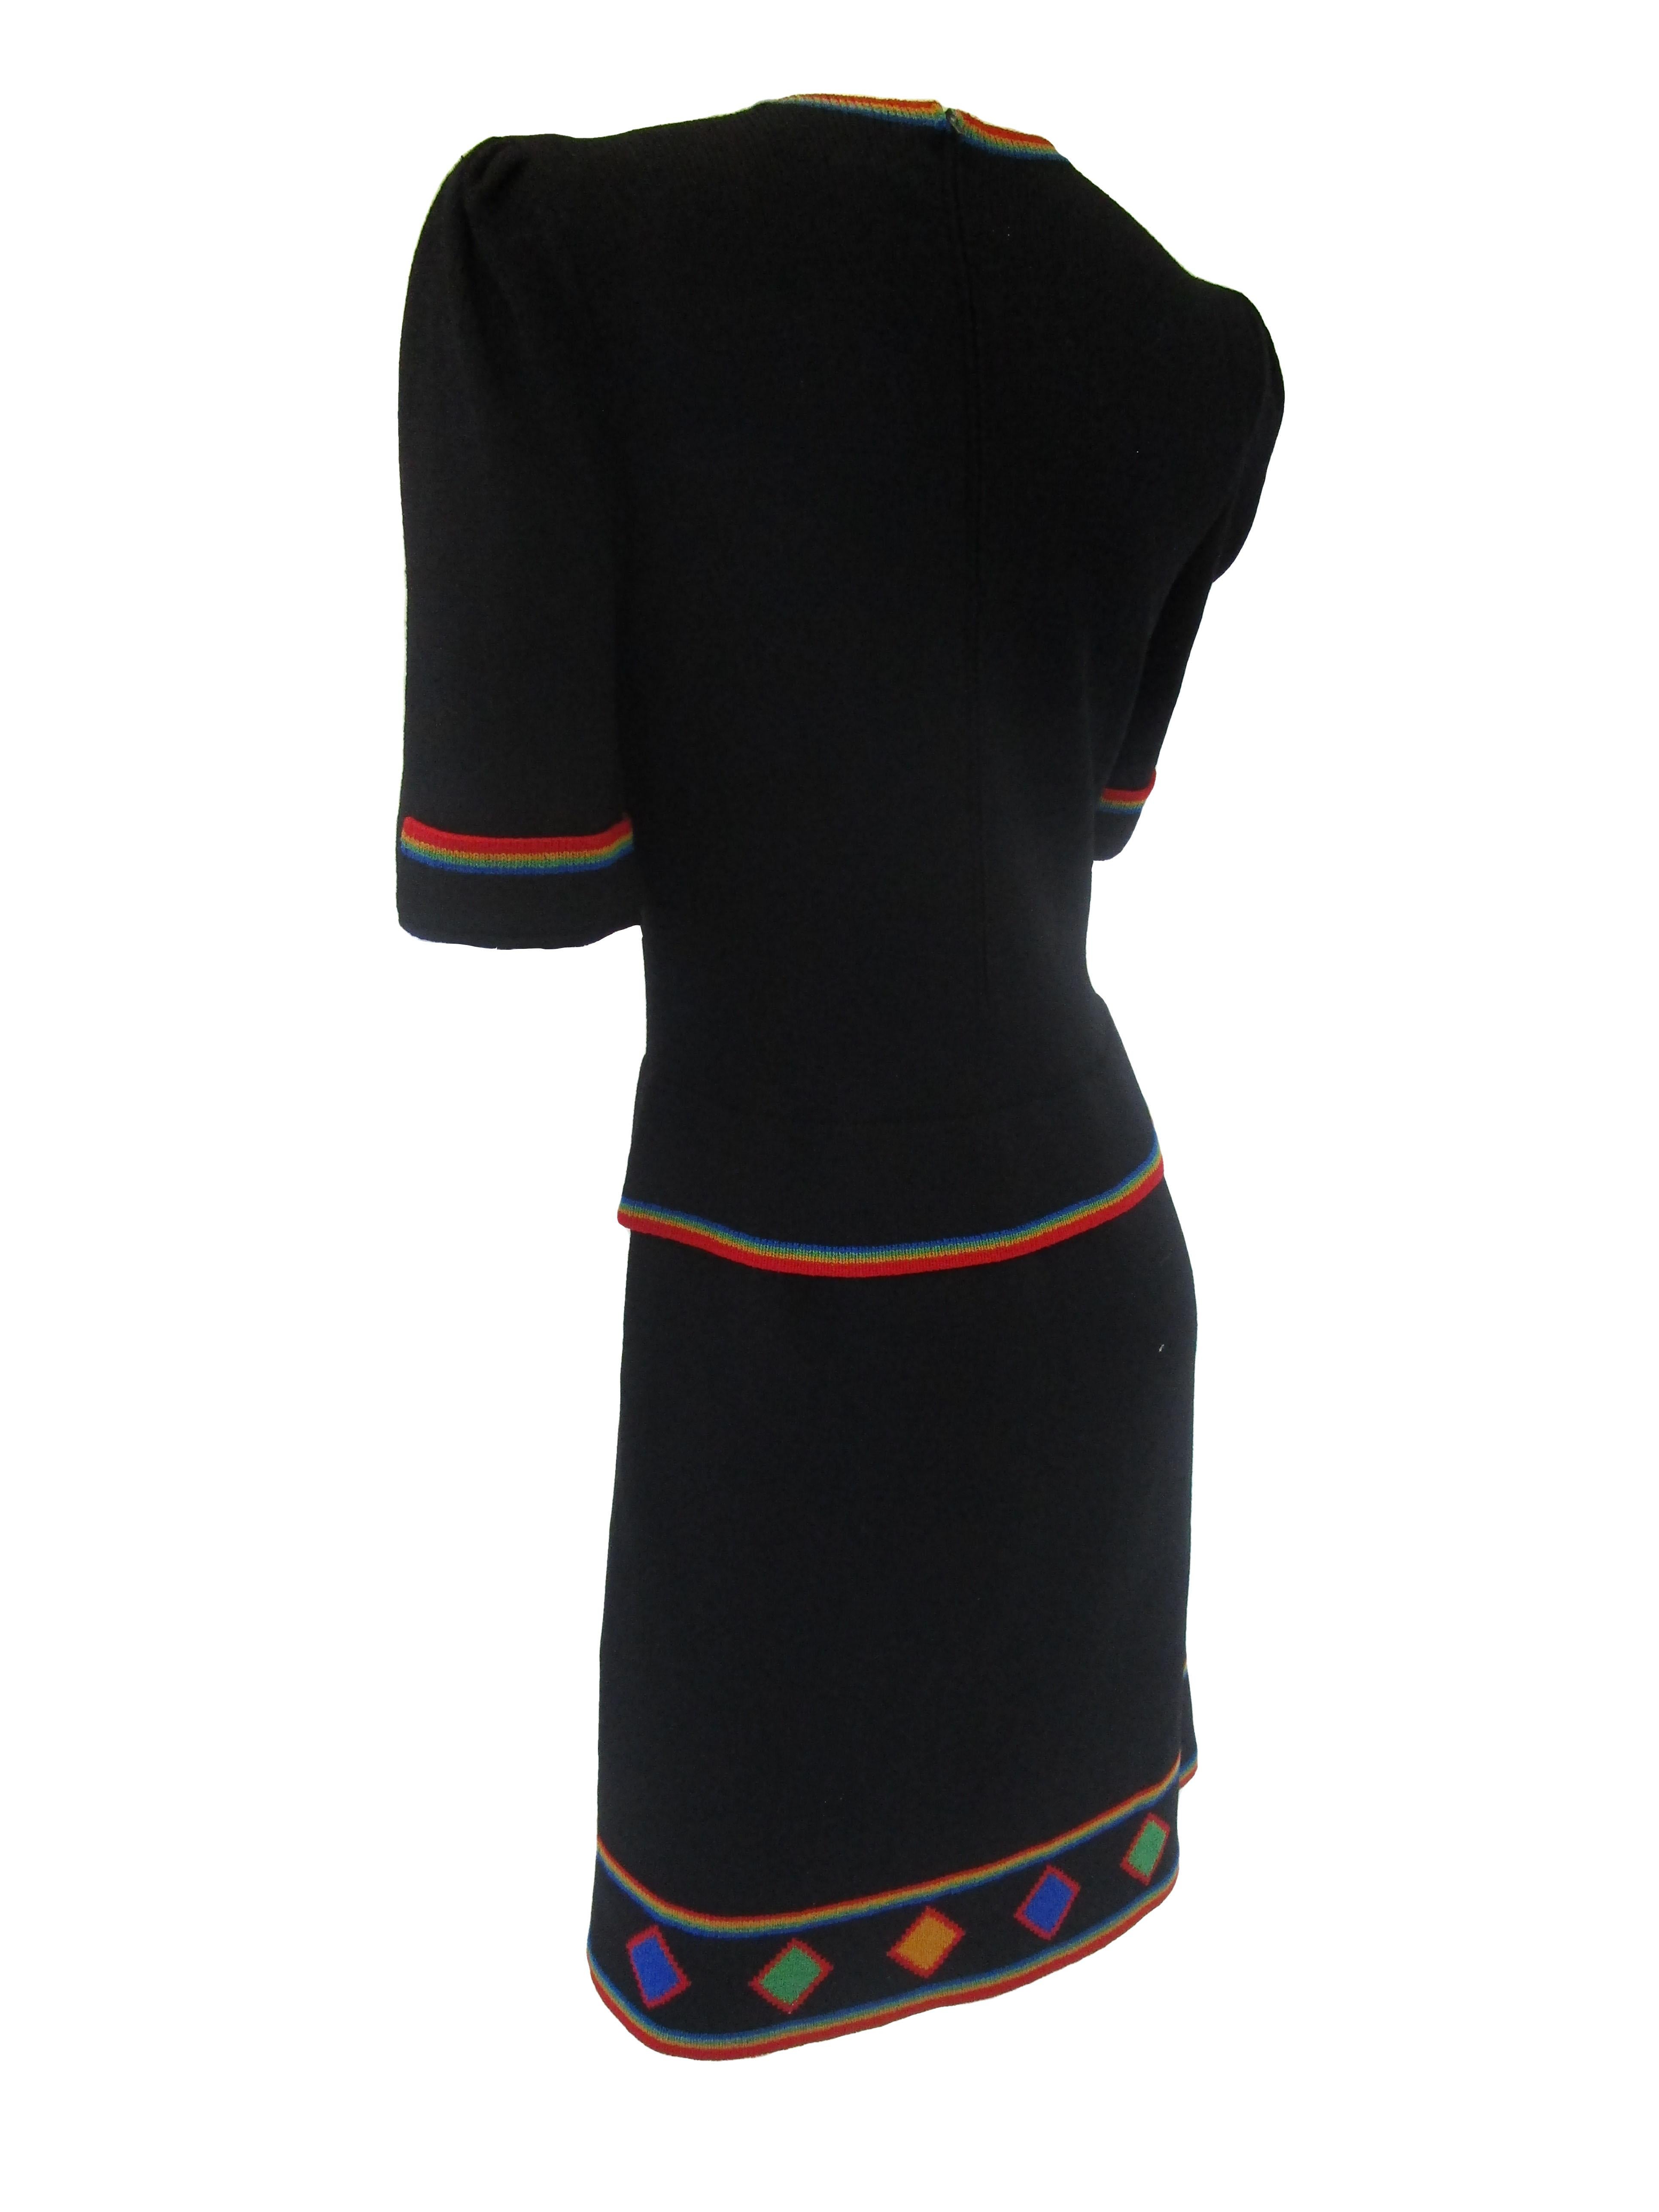 1970s Adolfo Black Knit Dress With Rainbow Details  For Sale 4